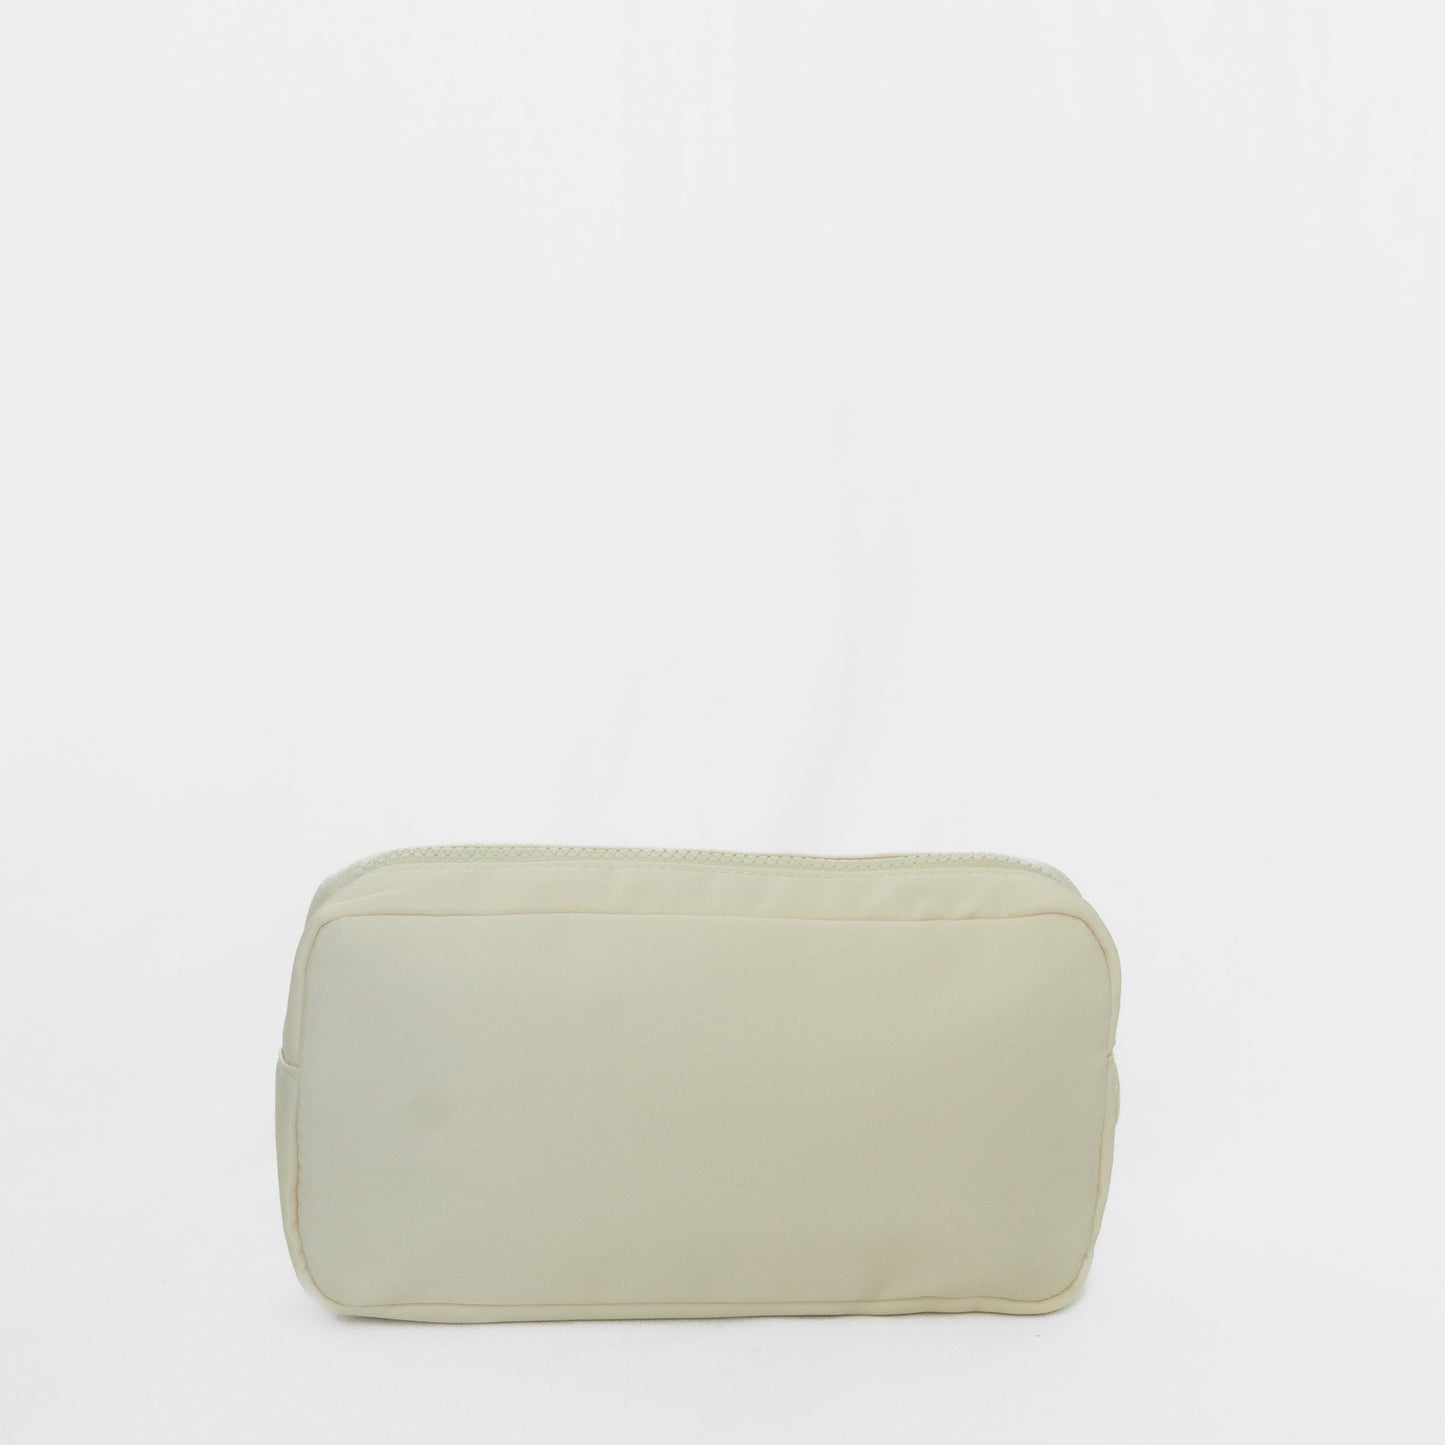 GW Essentials Nylon Pouch - Ivory - Give Wink